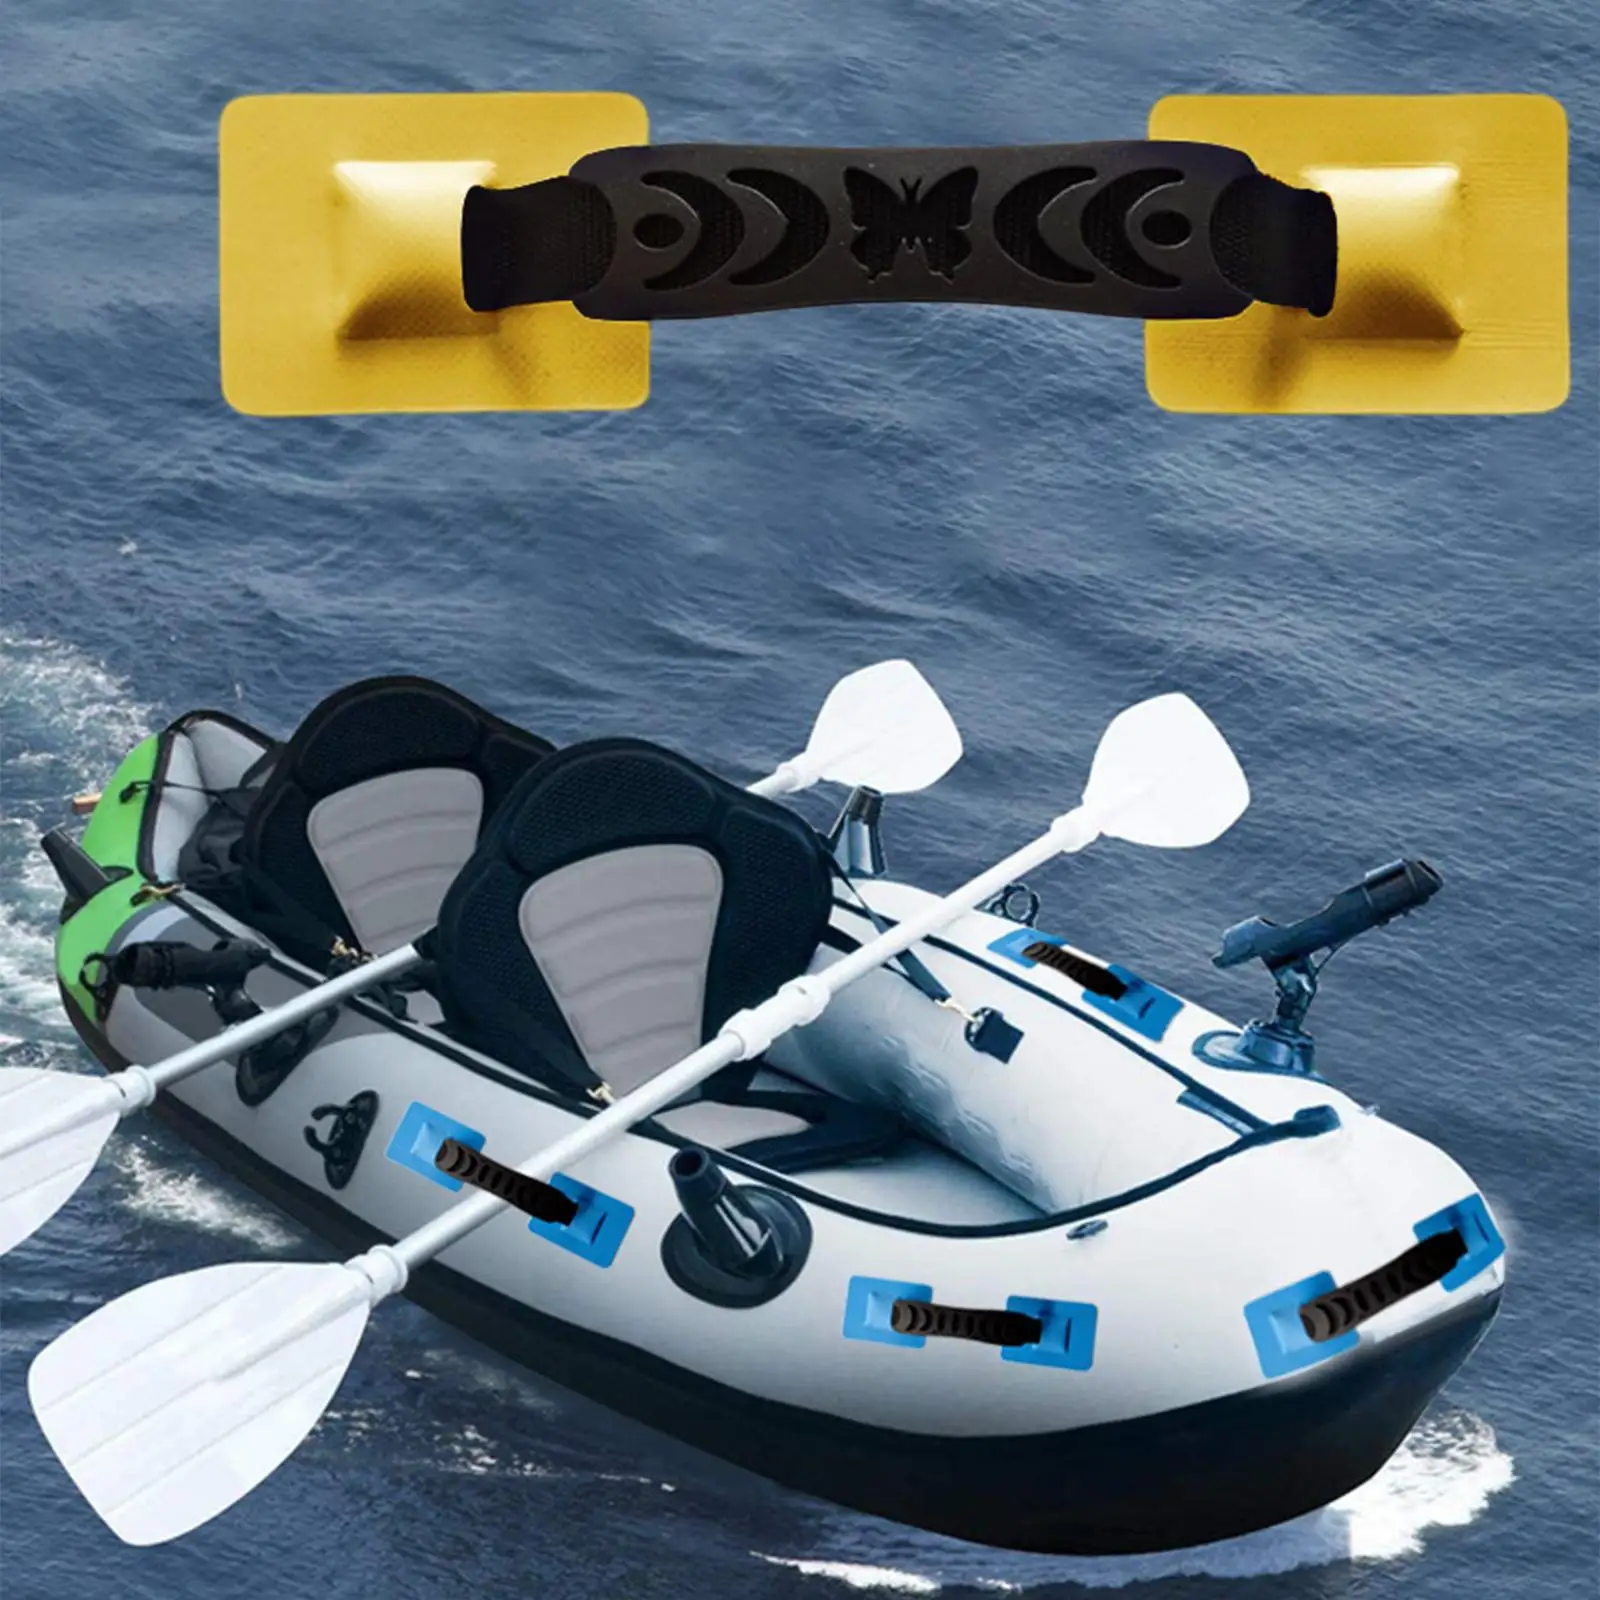 PVC Nylon Boat Side Carry Handles for Canoe Surfboard Paddle Board Strap Patch Fishing Boat Armrest Accessories Easy Install